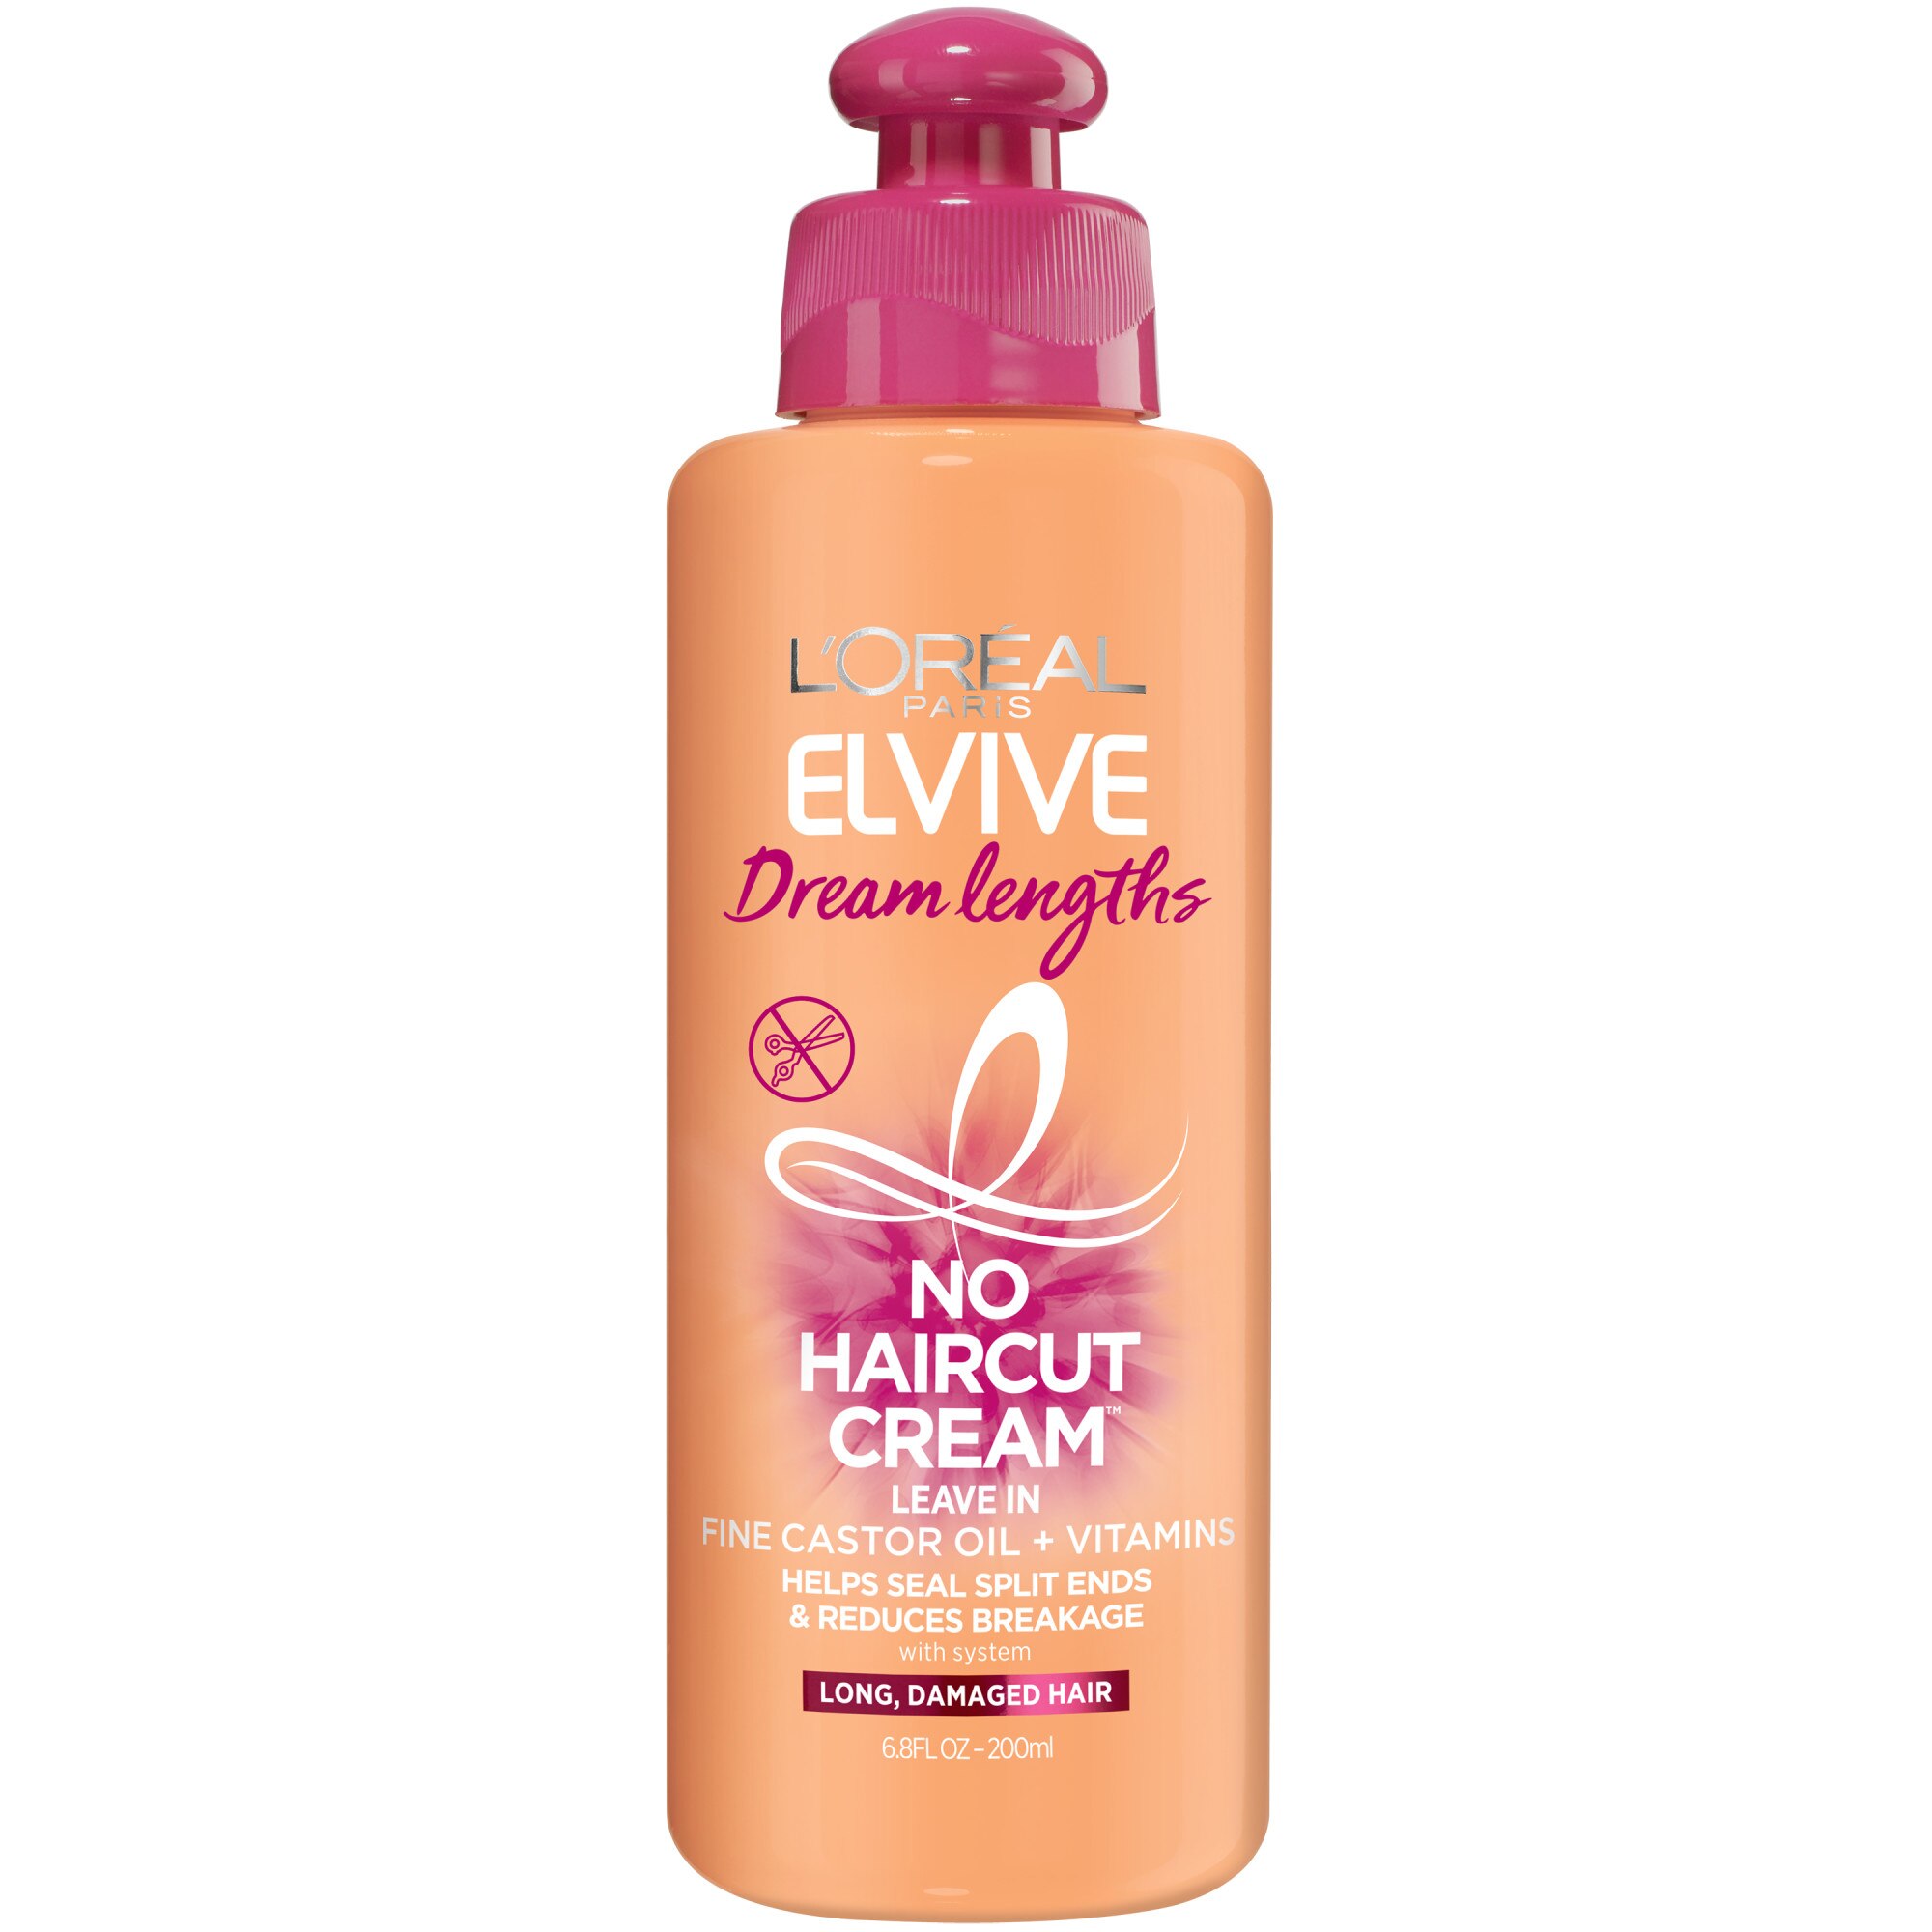 L'Oreal Paris Elvive Dream Lengths No Haircut Cream Leave-In Conditioner